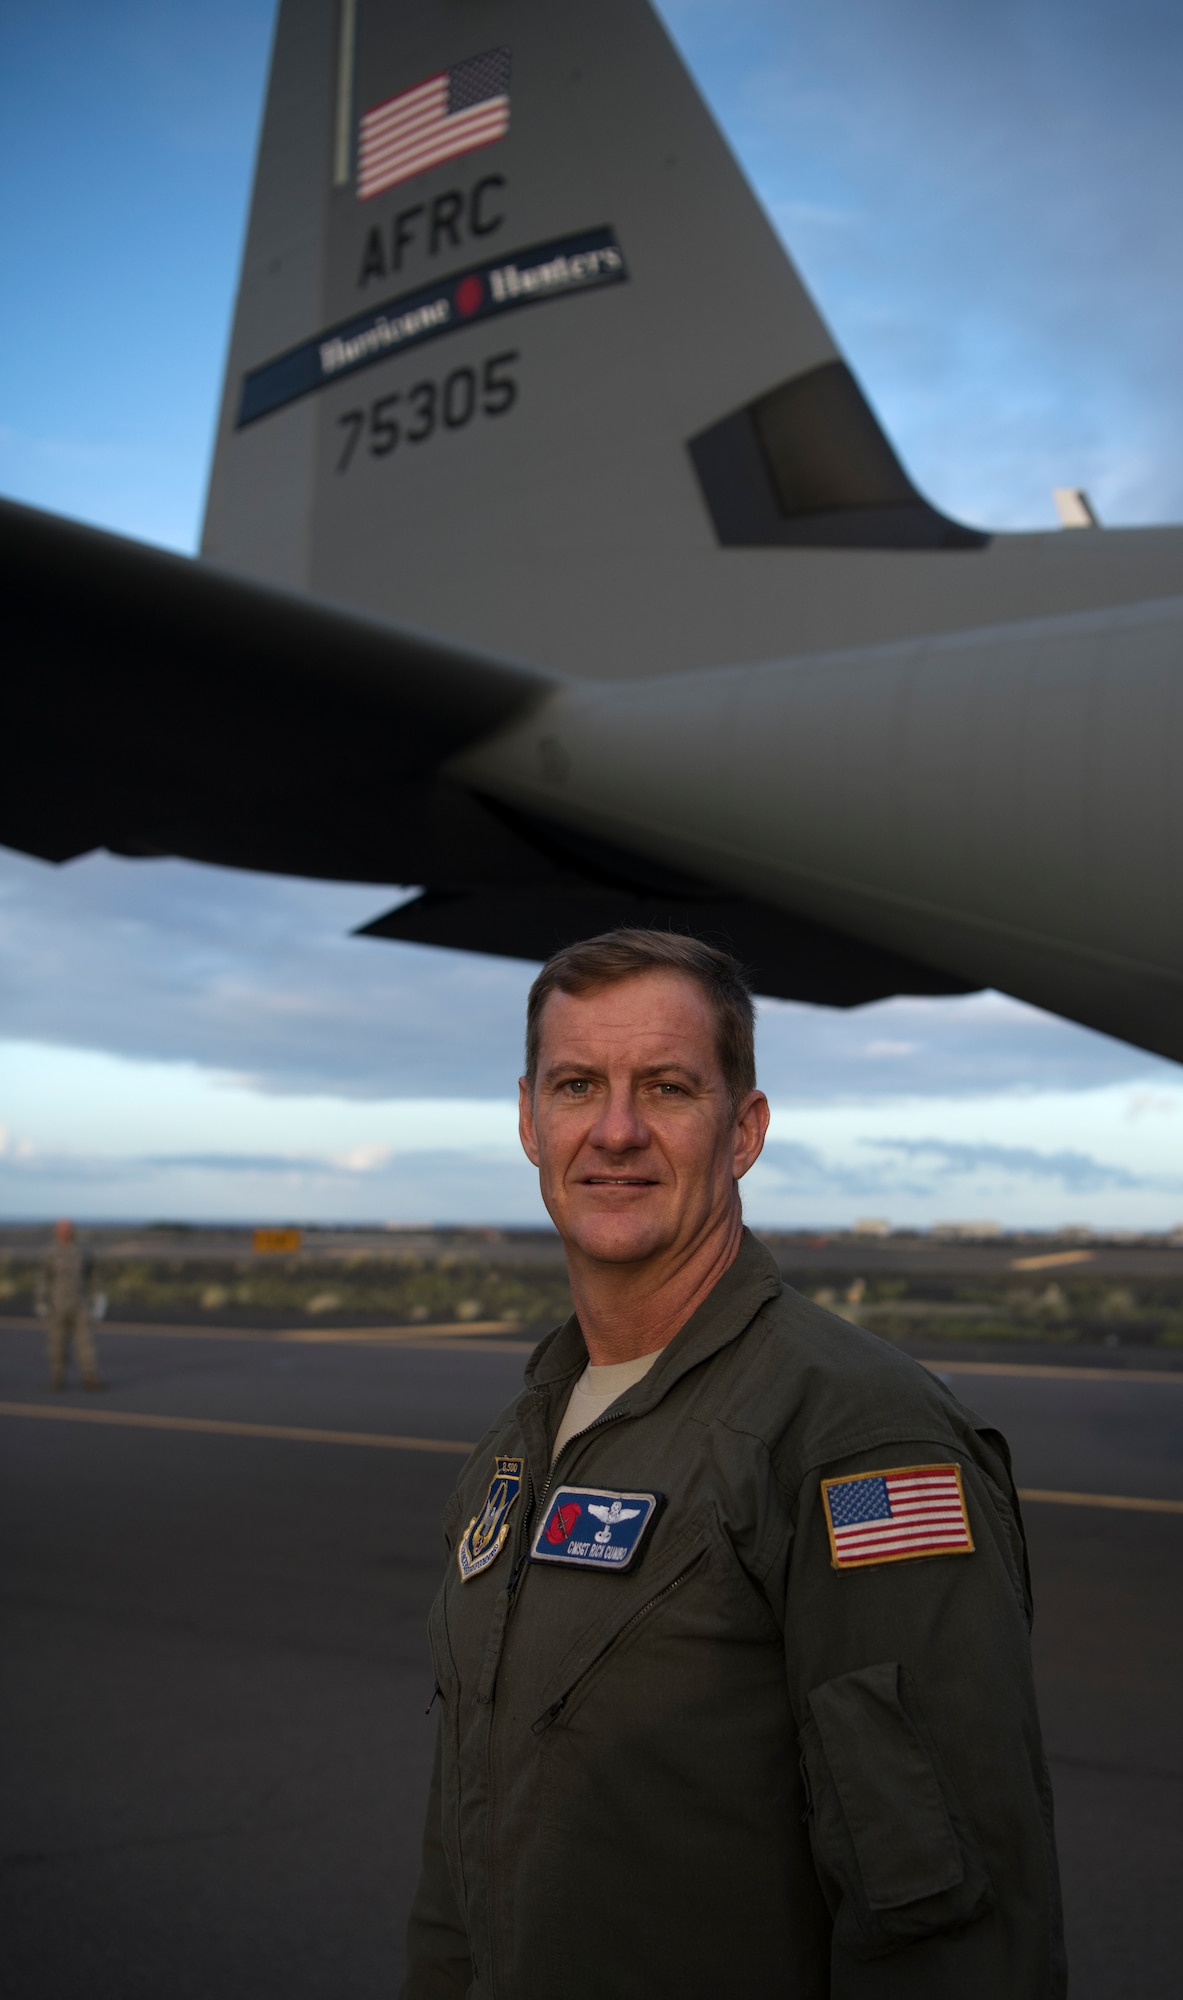 Chief Master Sgt. Rick Cumbo, loadmaster for the 53rd Weather Reconnaissance Squadron at Keesler Air Force Base, Mississippi, stands in front of the tail of a WC-130J Super Hercules at Kona International Airport, Hawaii, July 28, 2020. Cumbo became the recordholder for most eyewall penetrations, with 341, after flying Hurricane Douglas July 24. (U.S. Air Force photo by Senior Airman Kristen Pittman)